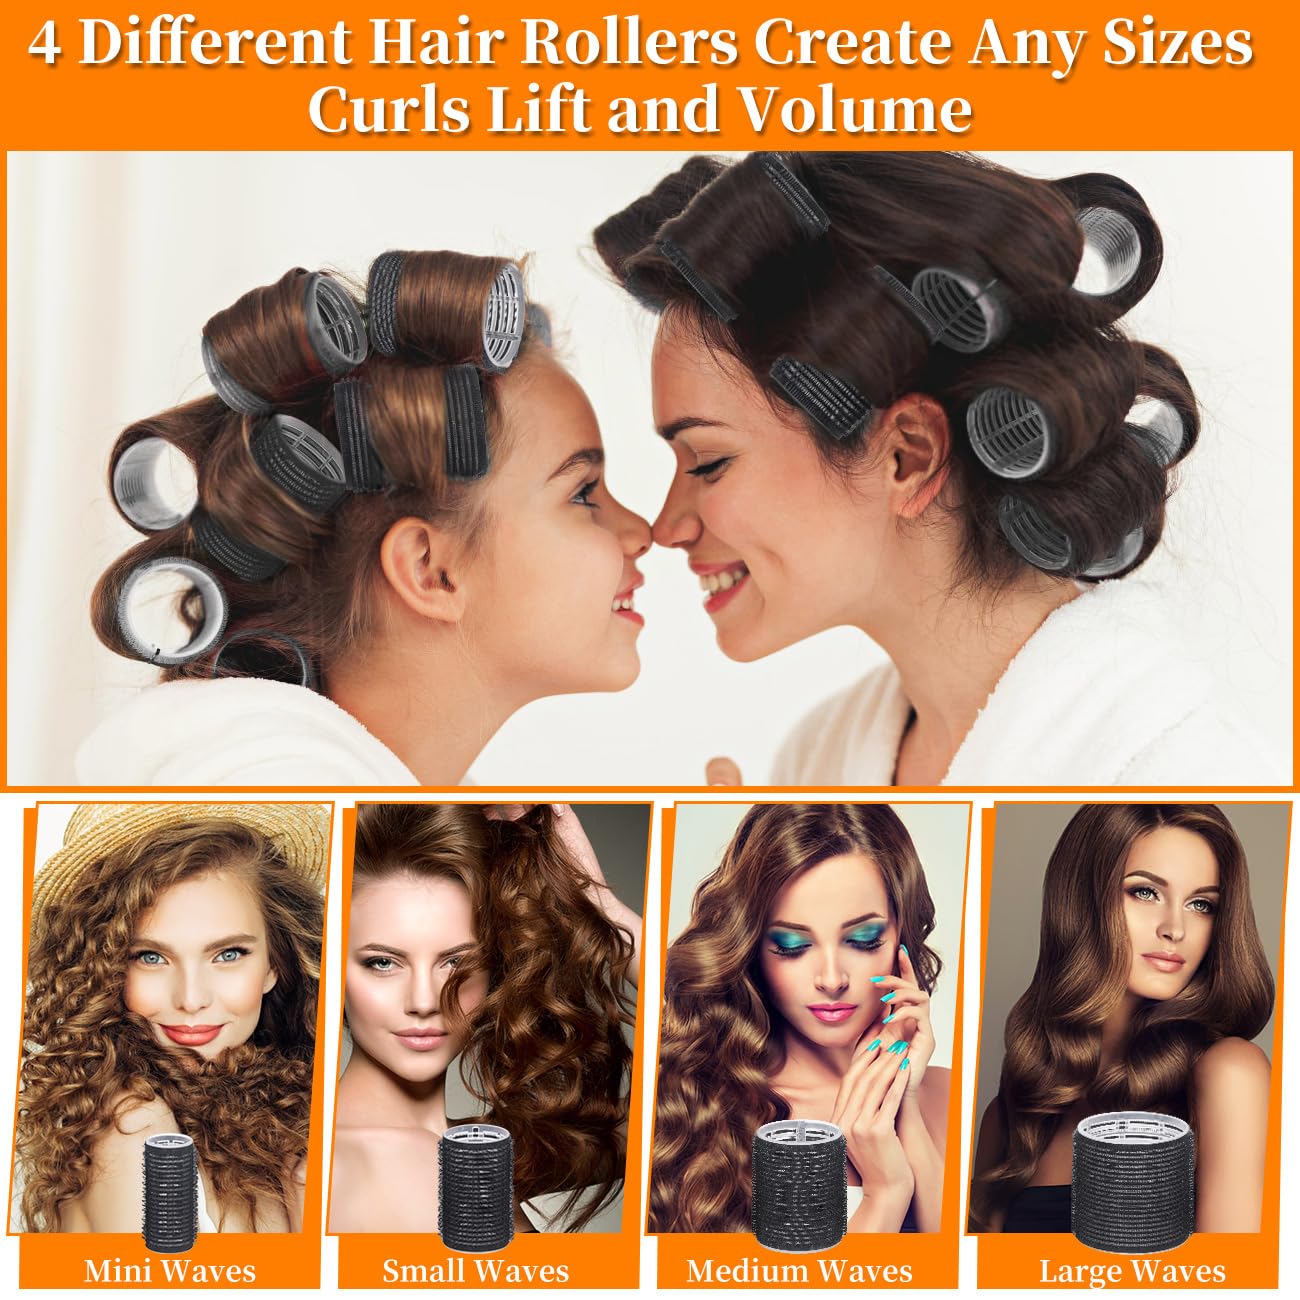 38PCS Hair Rollers Hair Curlers, Rollers, Curlers for Long Hair Thick, Jumbo Large Medium Small Rollers Set, 12 Stainless Steel Clips and Storage Bag